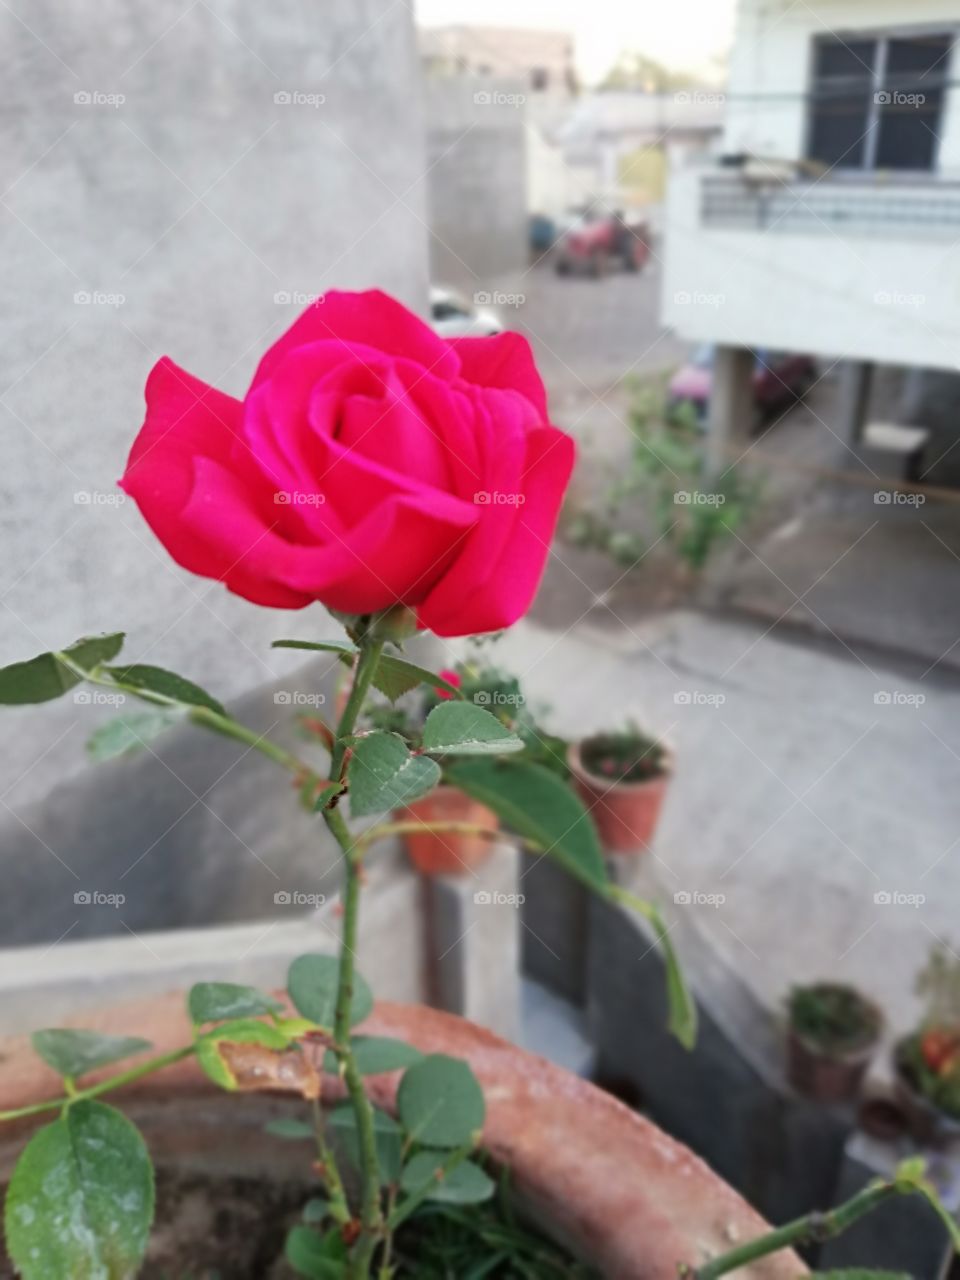 Awesome rose natural of beautiful smell and love natural beauty of romantic rose